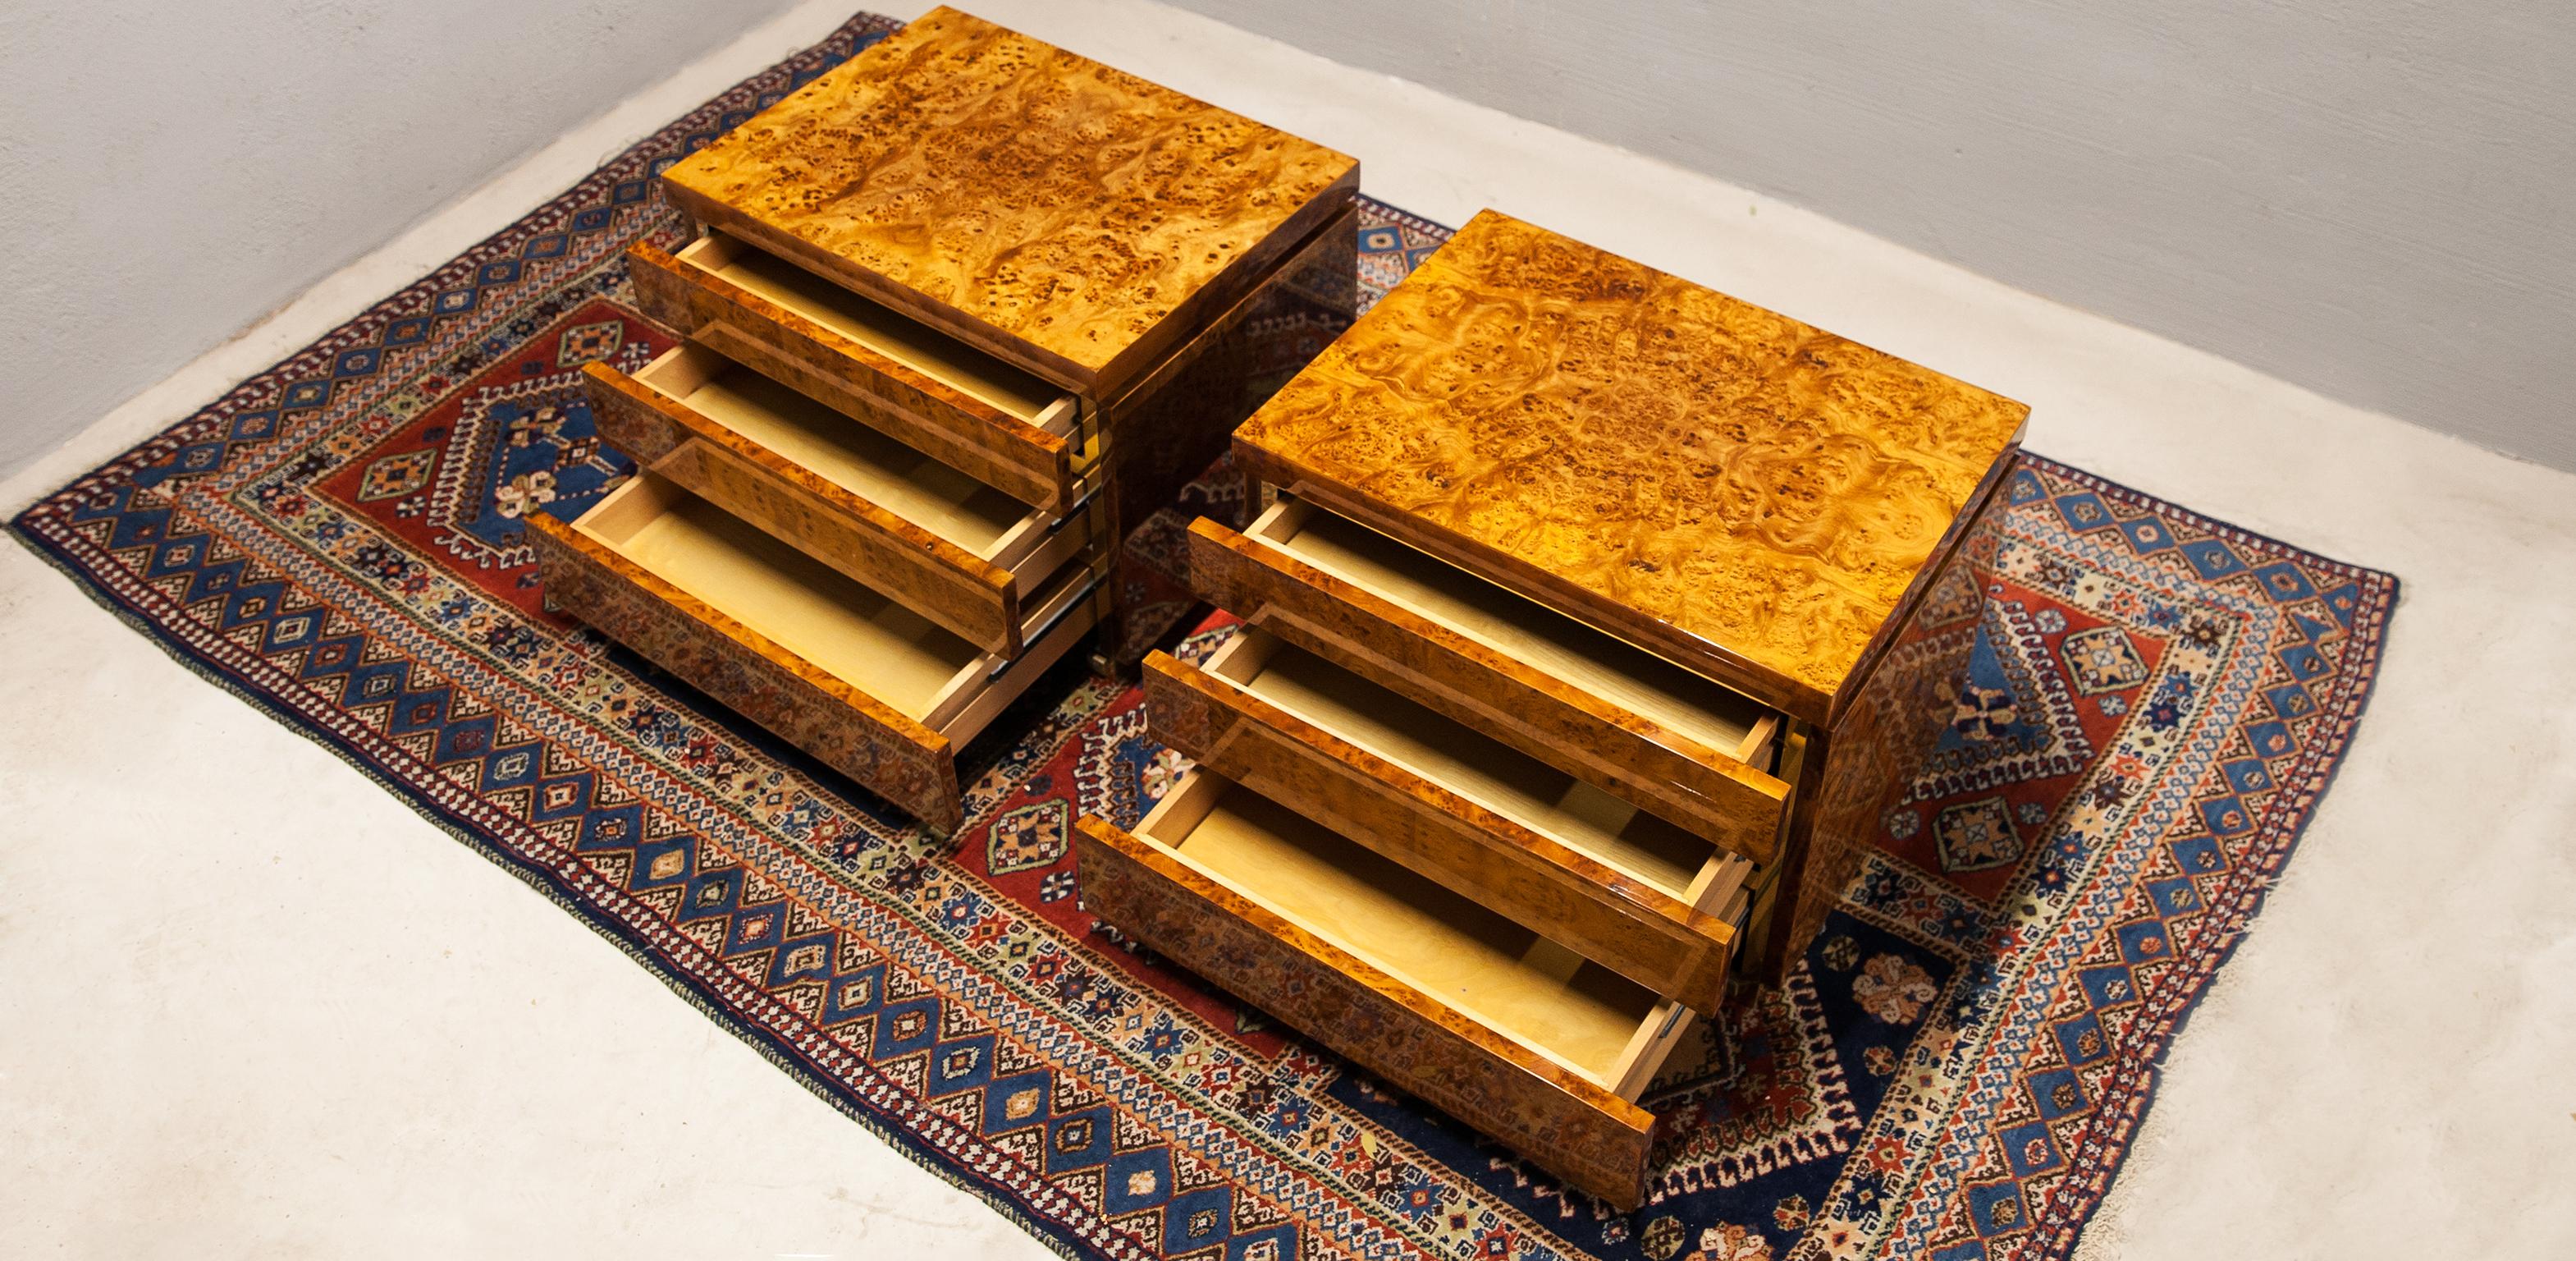 Elegant side tables or night stands by Jean Claude Mahey in burr poplar Wood and brass details from the 70s. Each consisting of 3 drawers and beautifully framed by the brass strips which highlight the aspect of the wood through the brass angles.